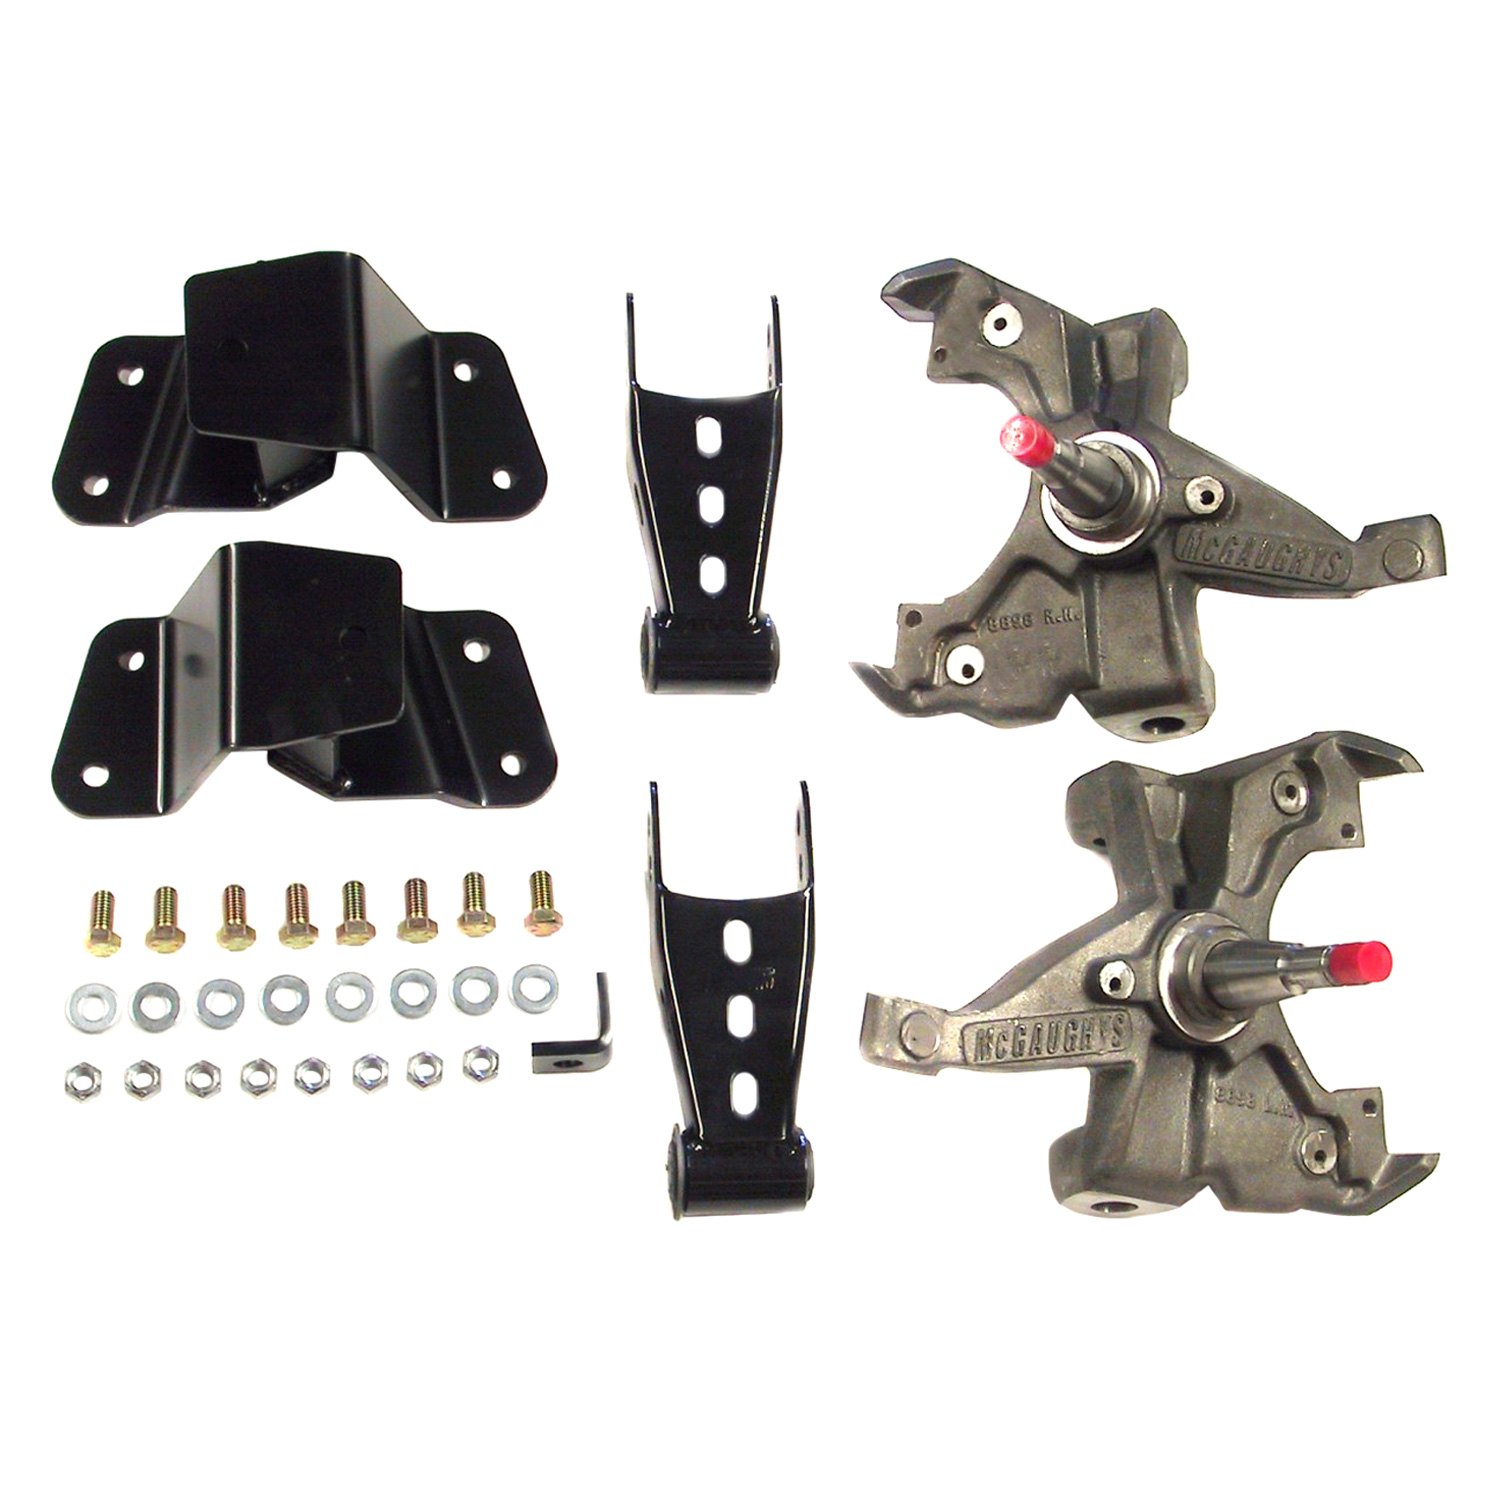 McGaughy's® 93129 - 2.5" x 4" Front and Rear Deluxe Lowering Kit